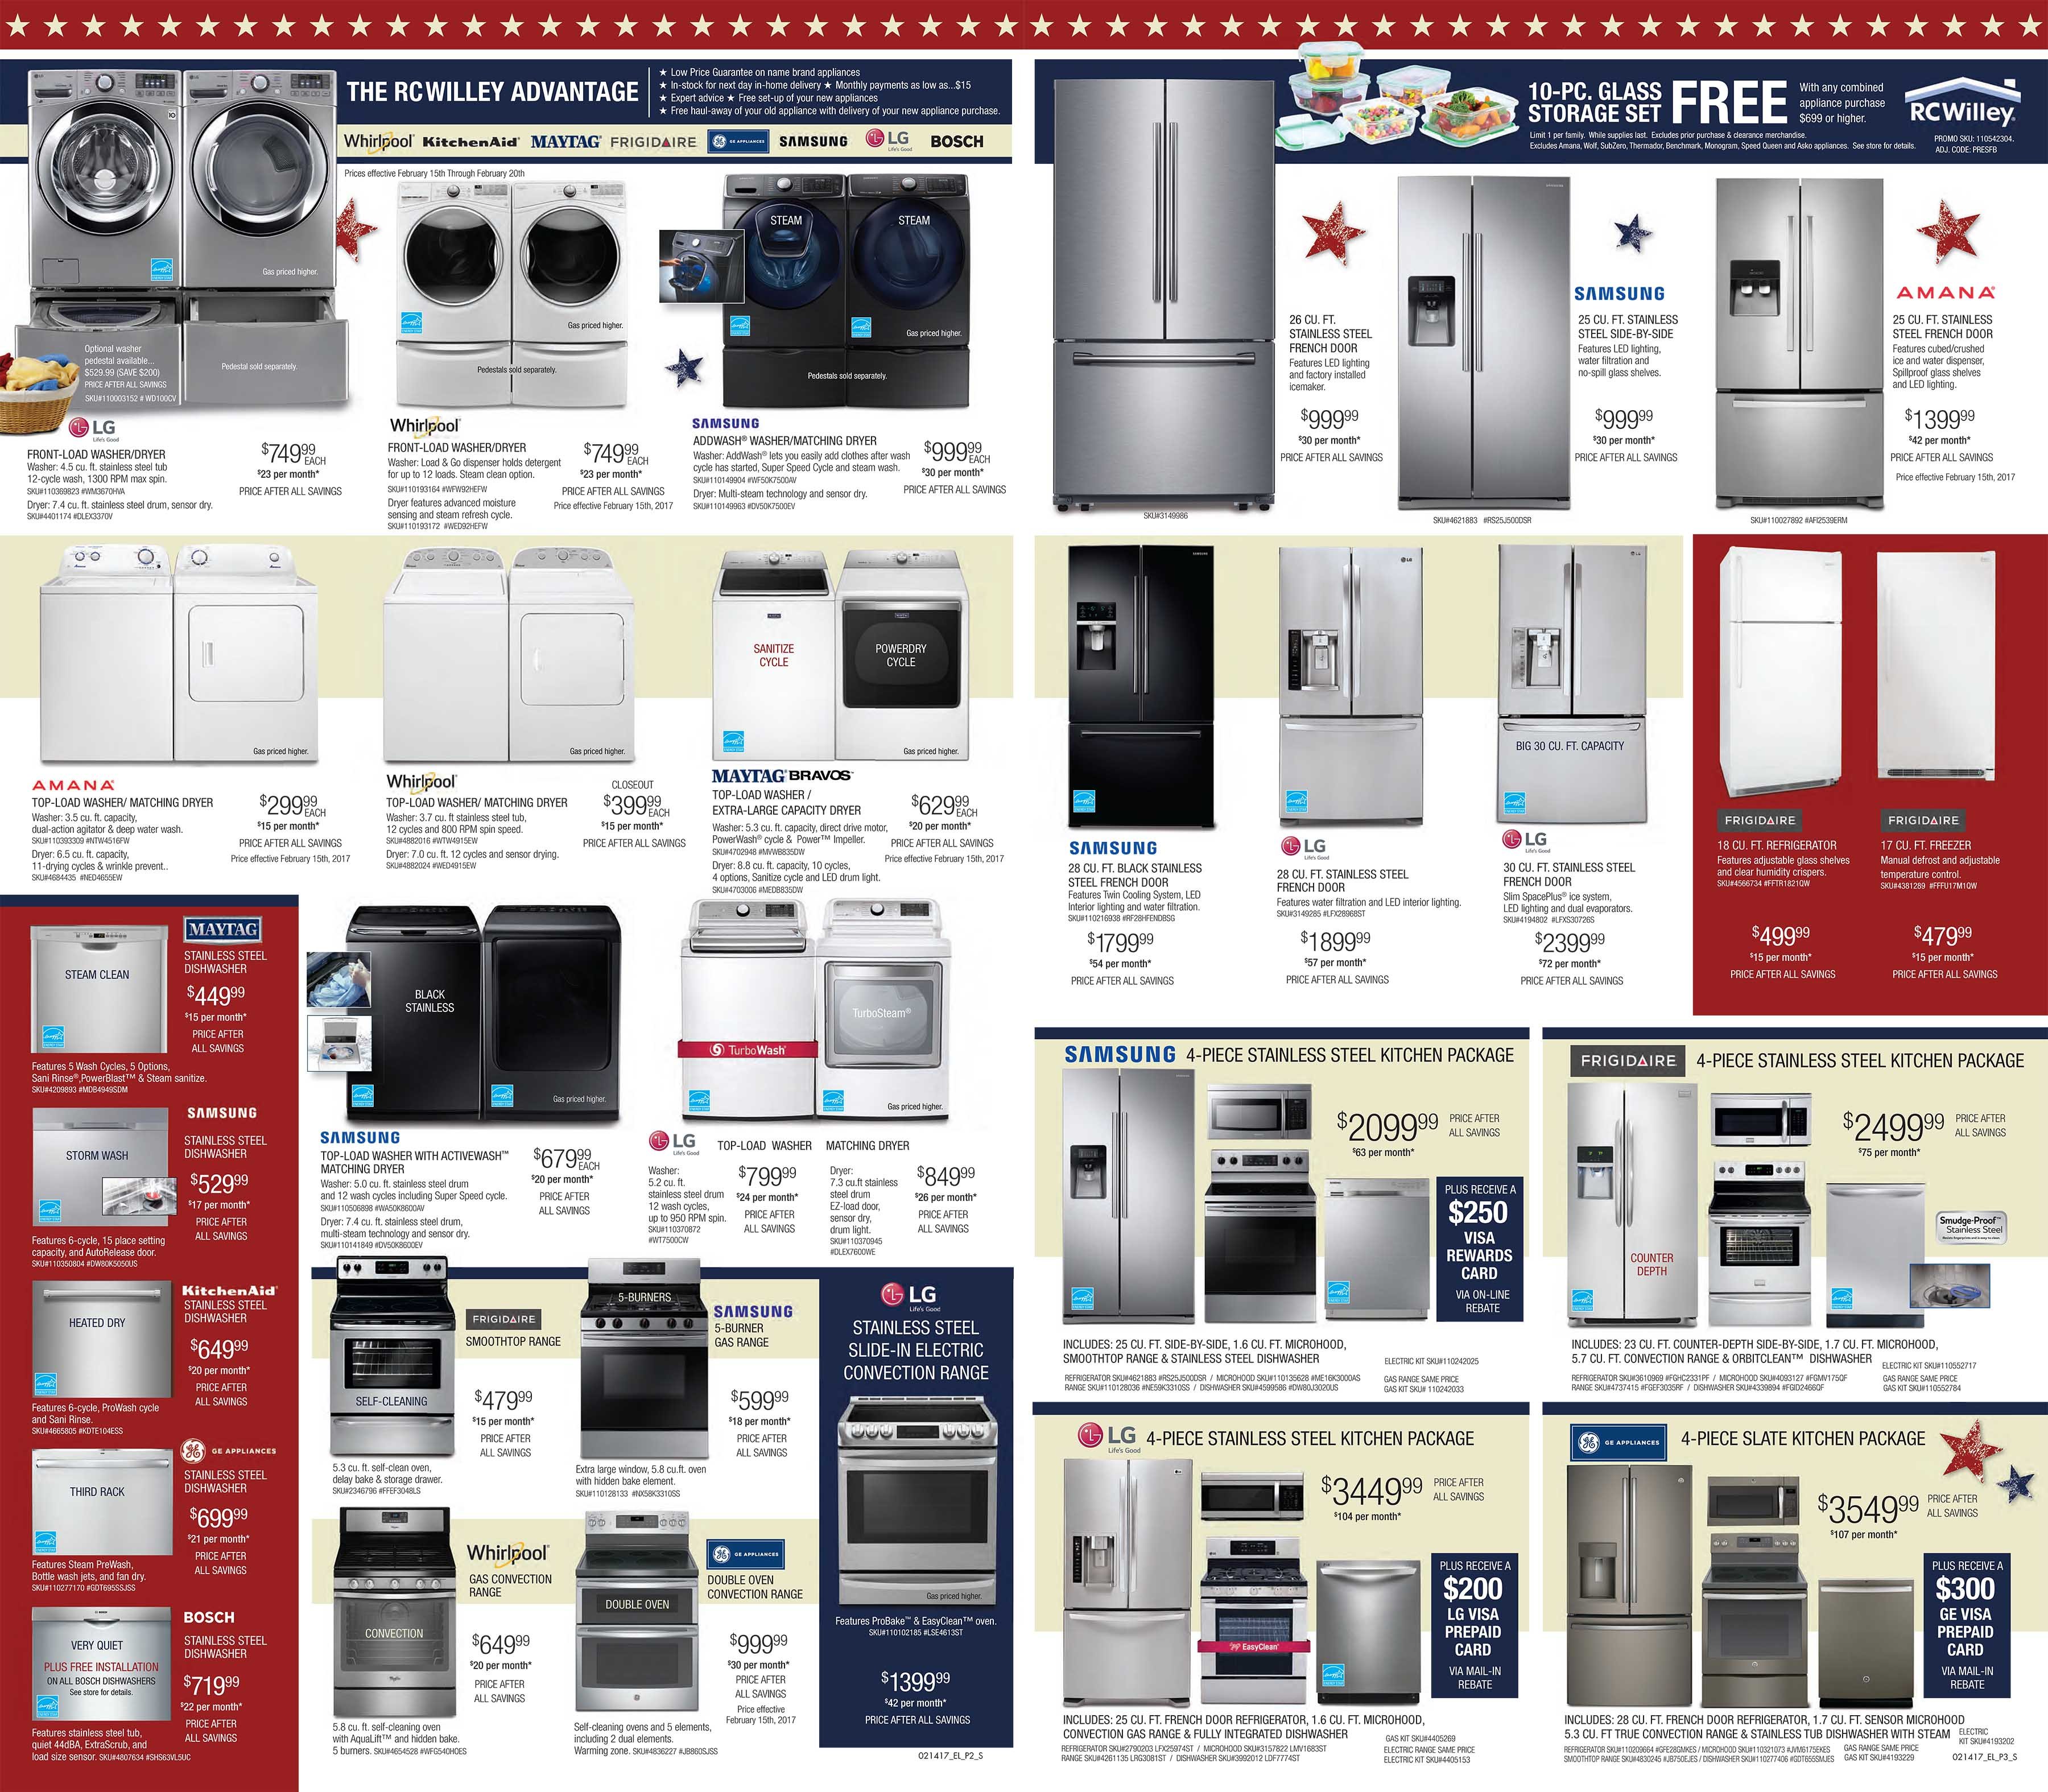 Presidents' Day Appliances & Electronics Sale! RC Willey Furniture Store